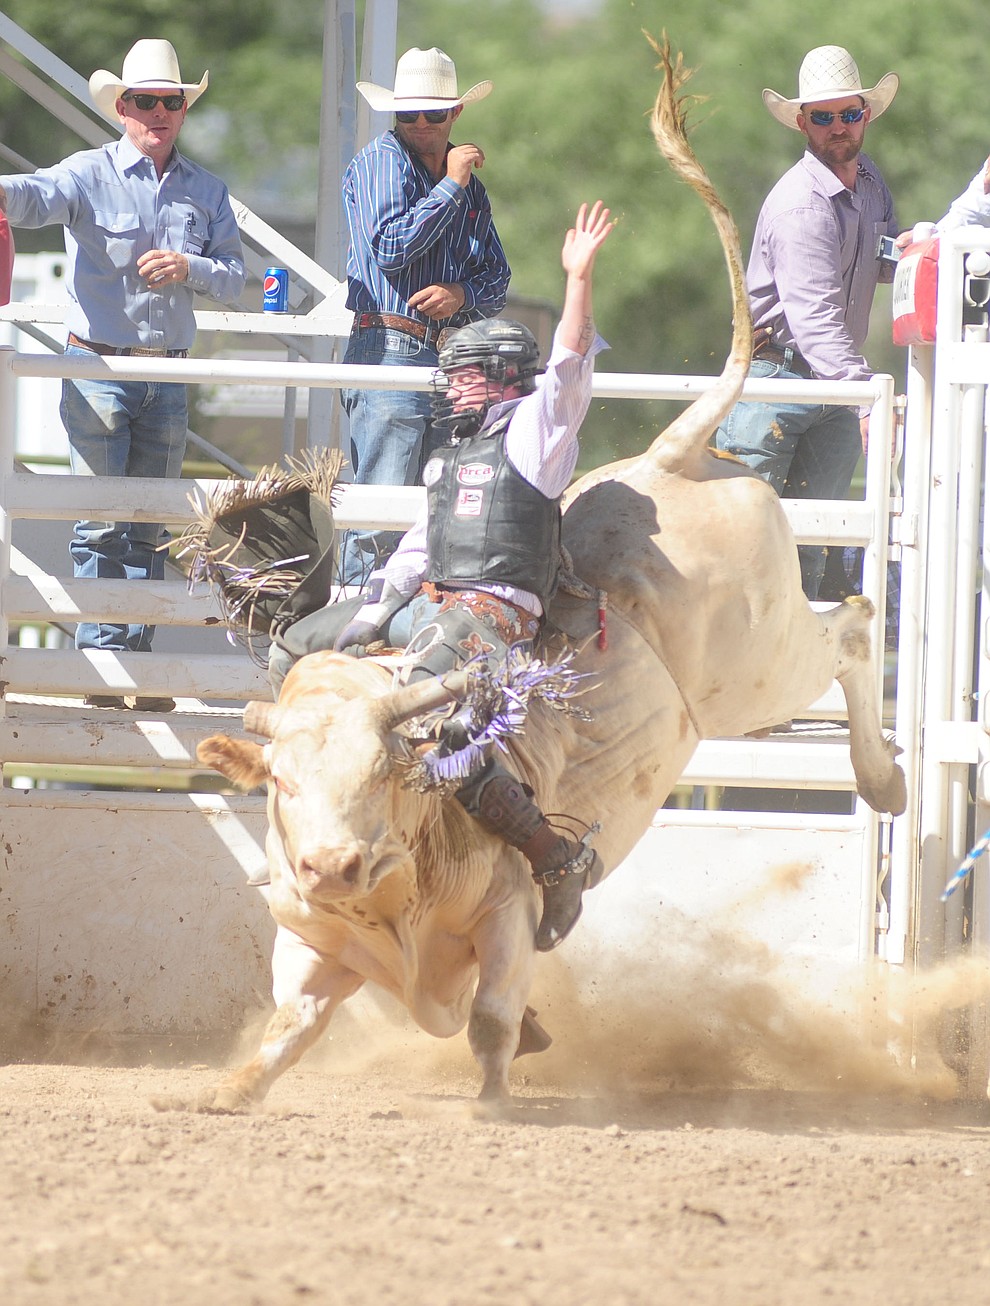 Toby Lee on Haunted Mesa in the bull riding during the 8th and final performance of the Prescott Frontier Days Rodeo Tuesday, July 4 at the Prescott Rodeo Grounds.  (Les Stukenberg/Courier)